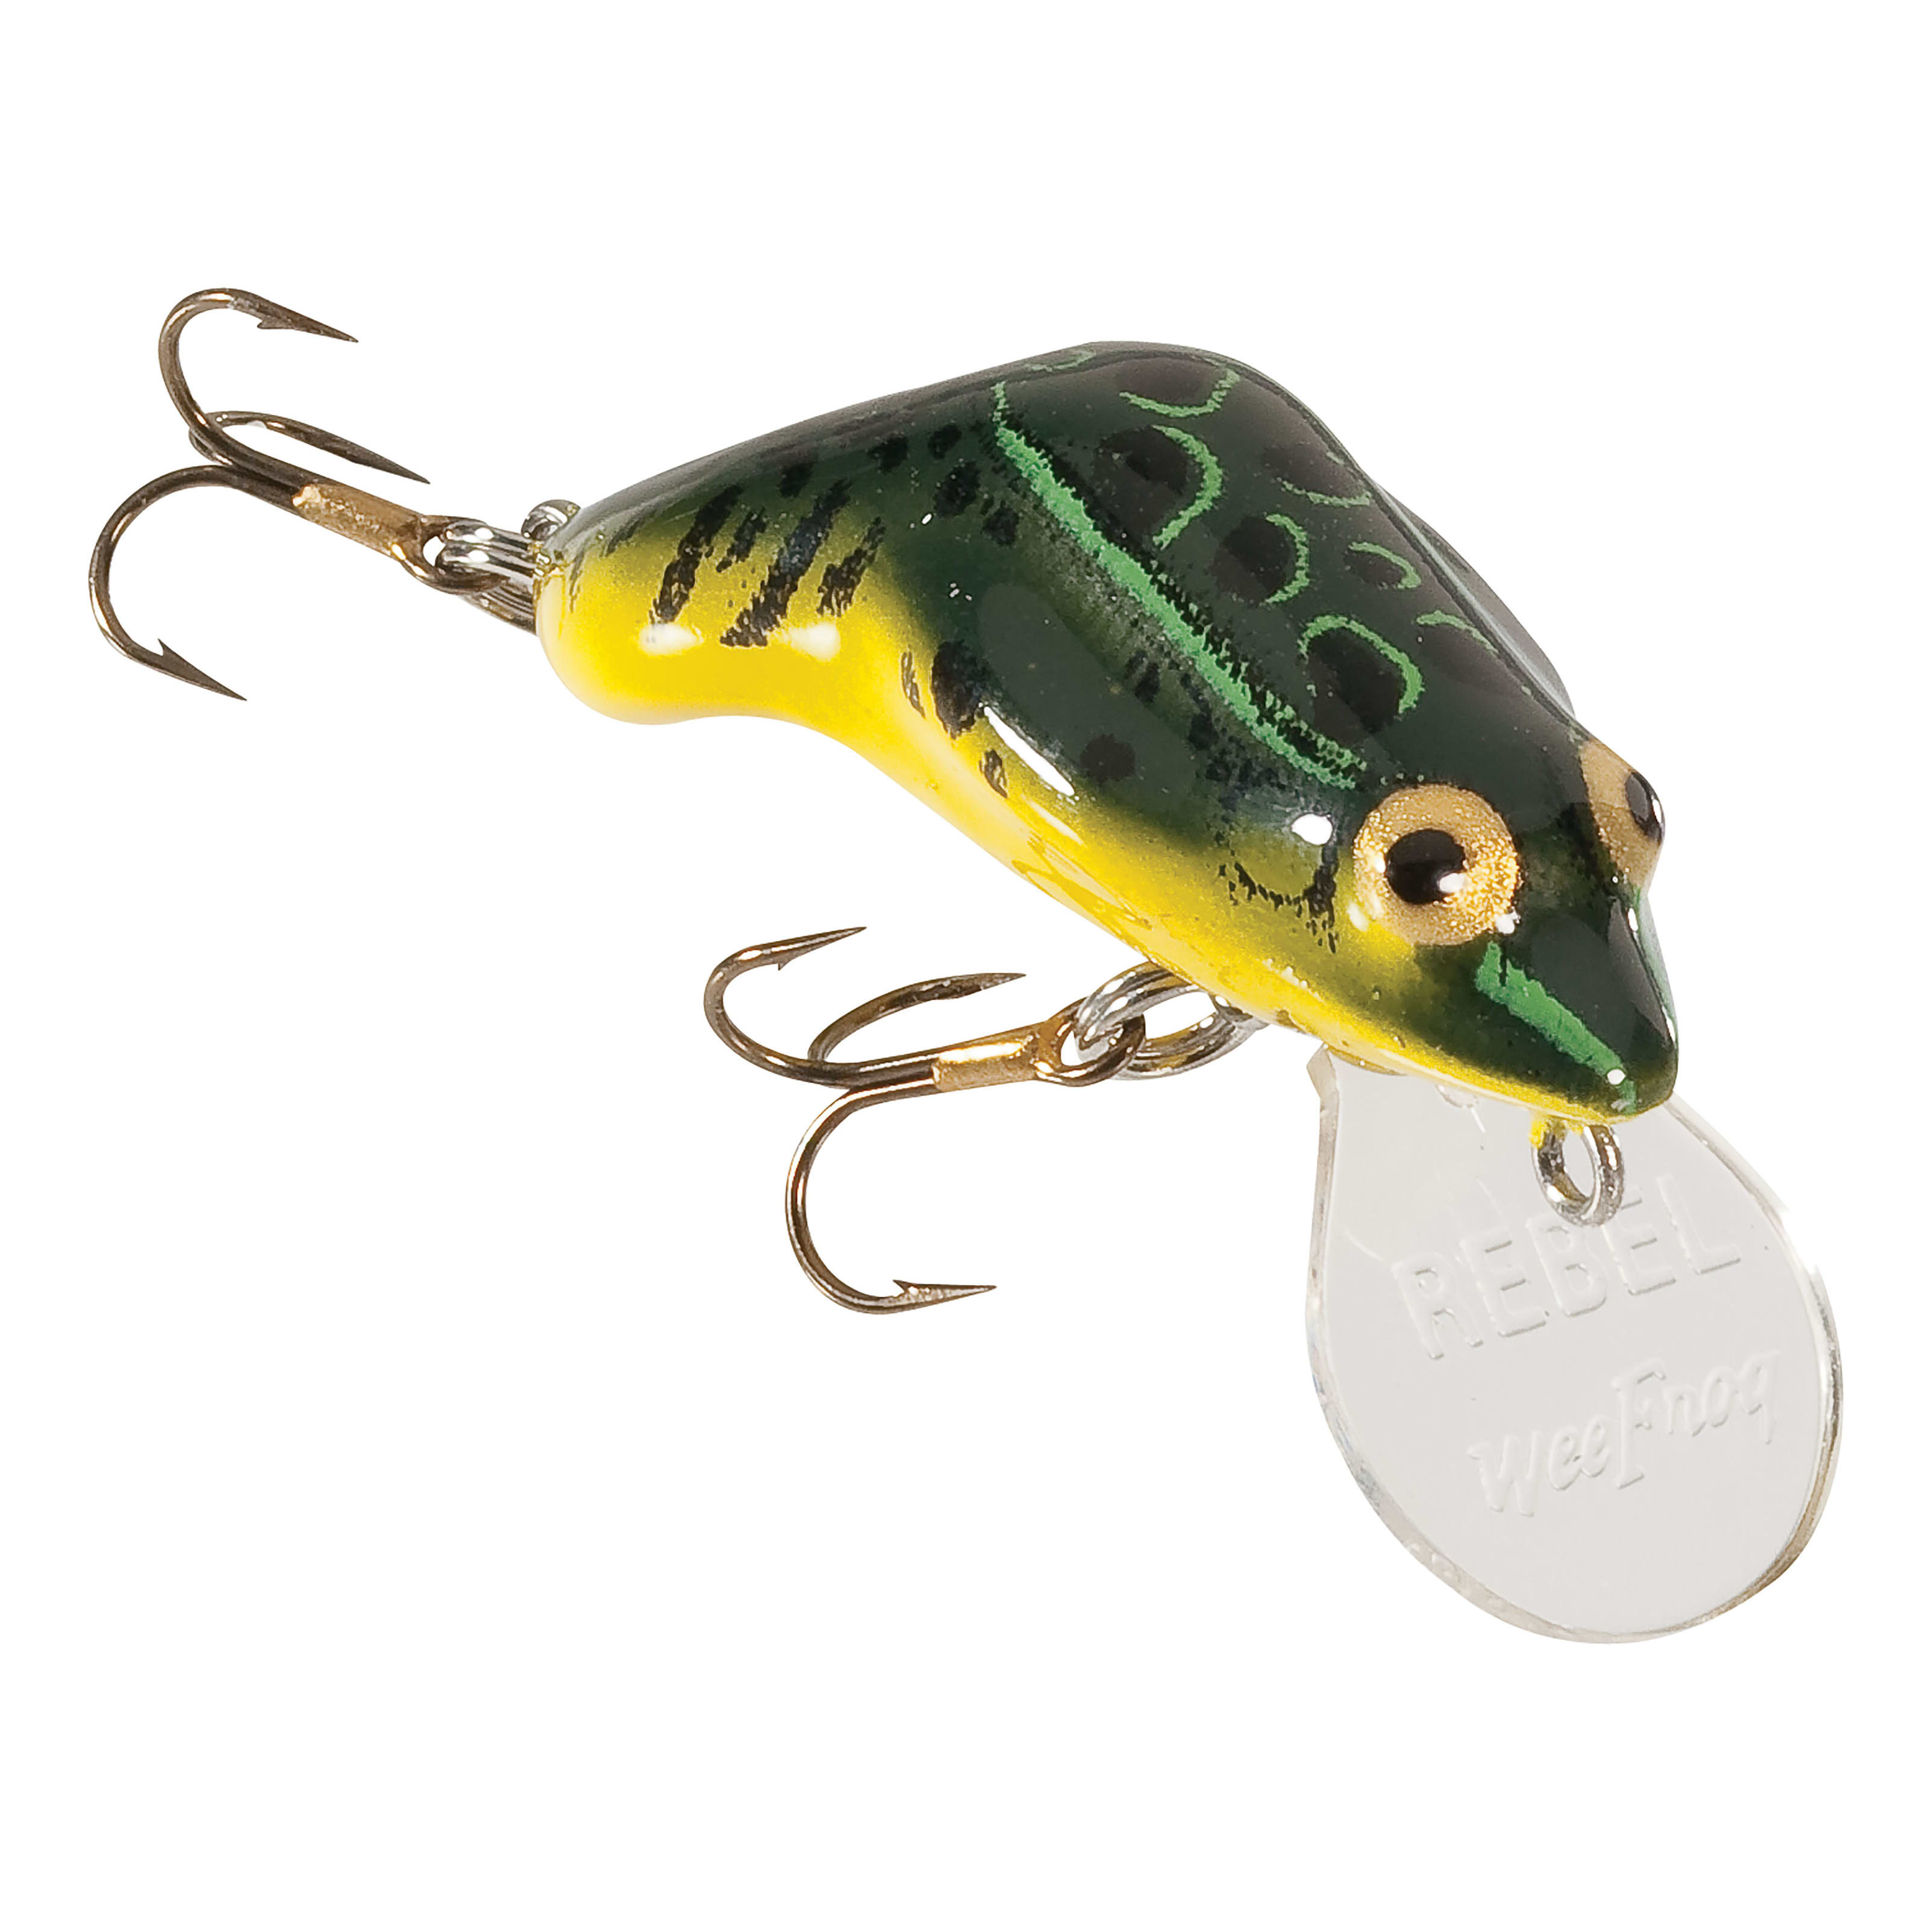 LIVETARGET® Field Mouse Lure